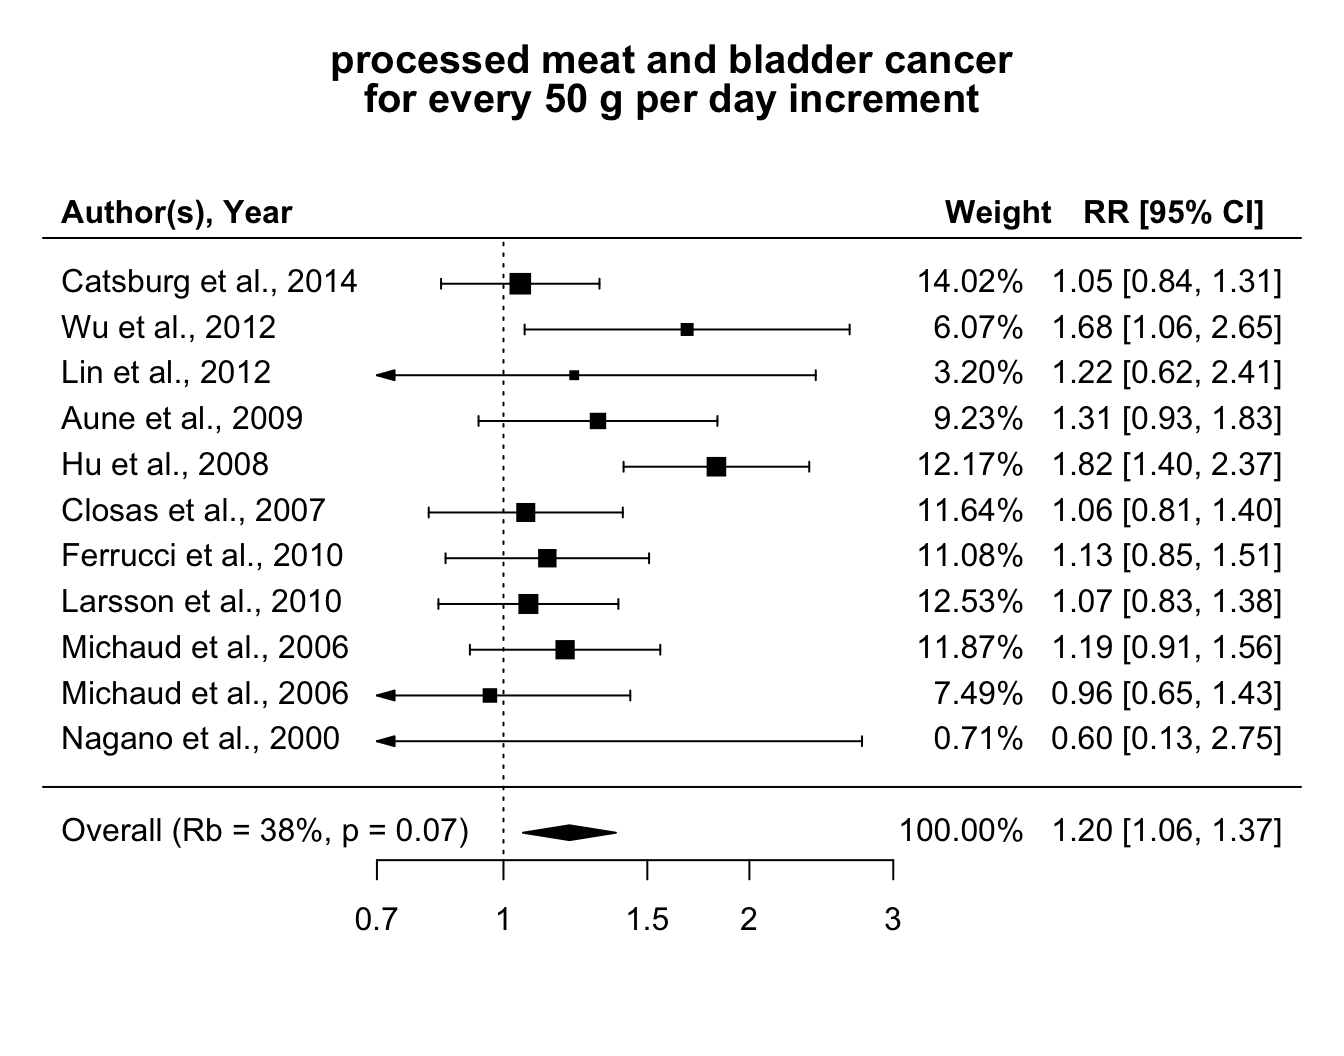 Relative risks of bladder cancer for every 50 g increase per day in processed meat consumption.